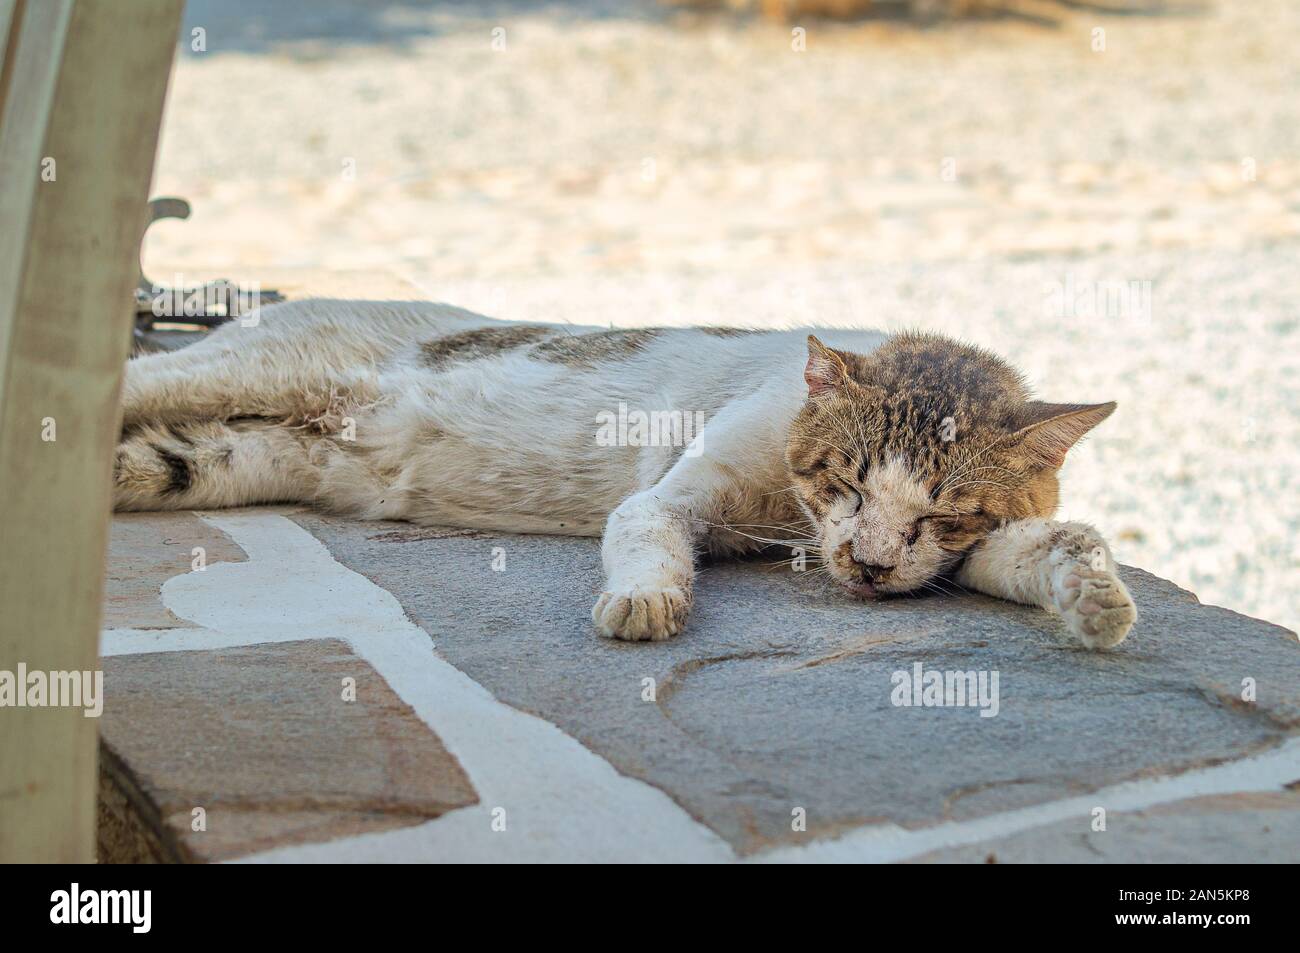 Cute ginger cat stretched out and relaxing on terrace in the garden. Stock Photo